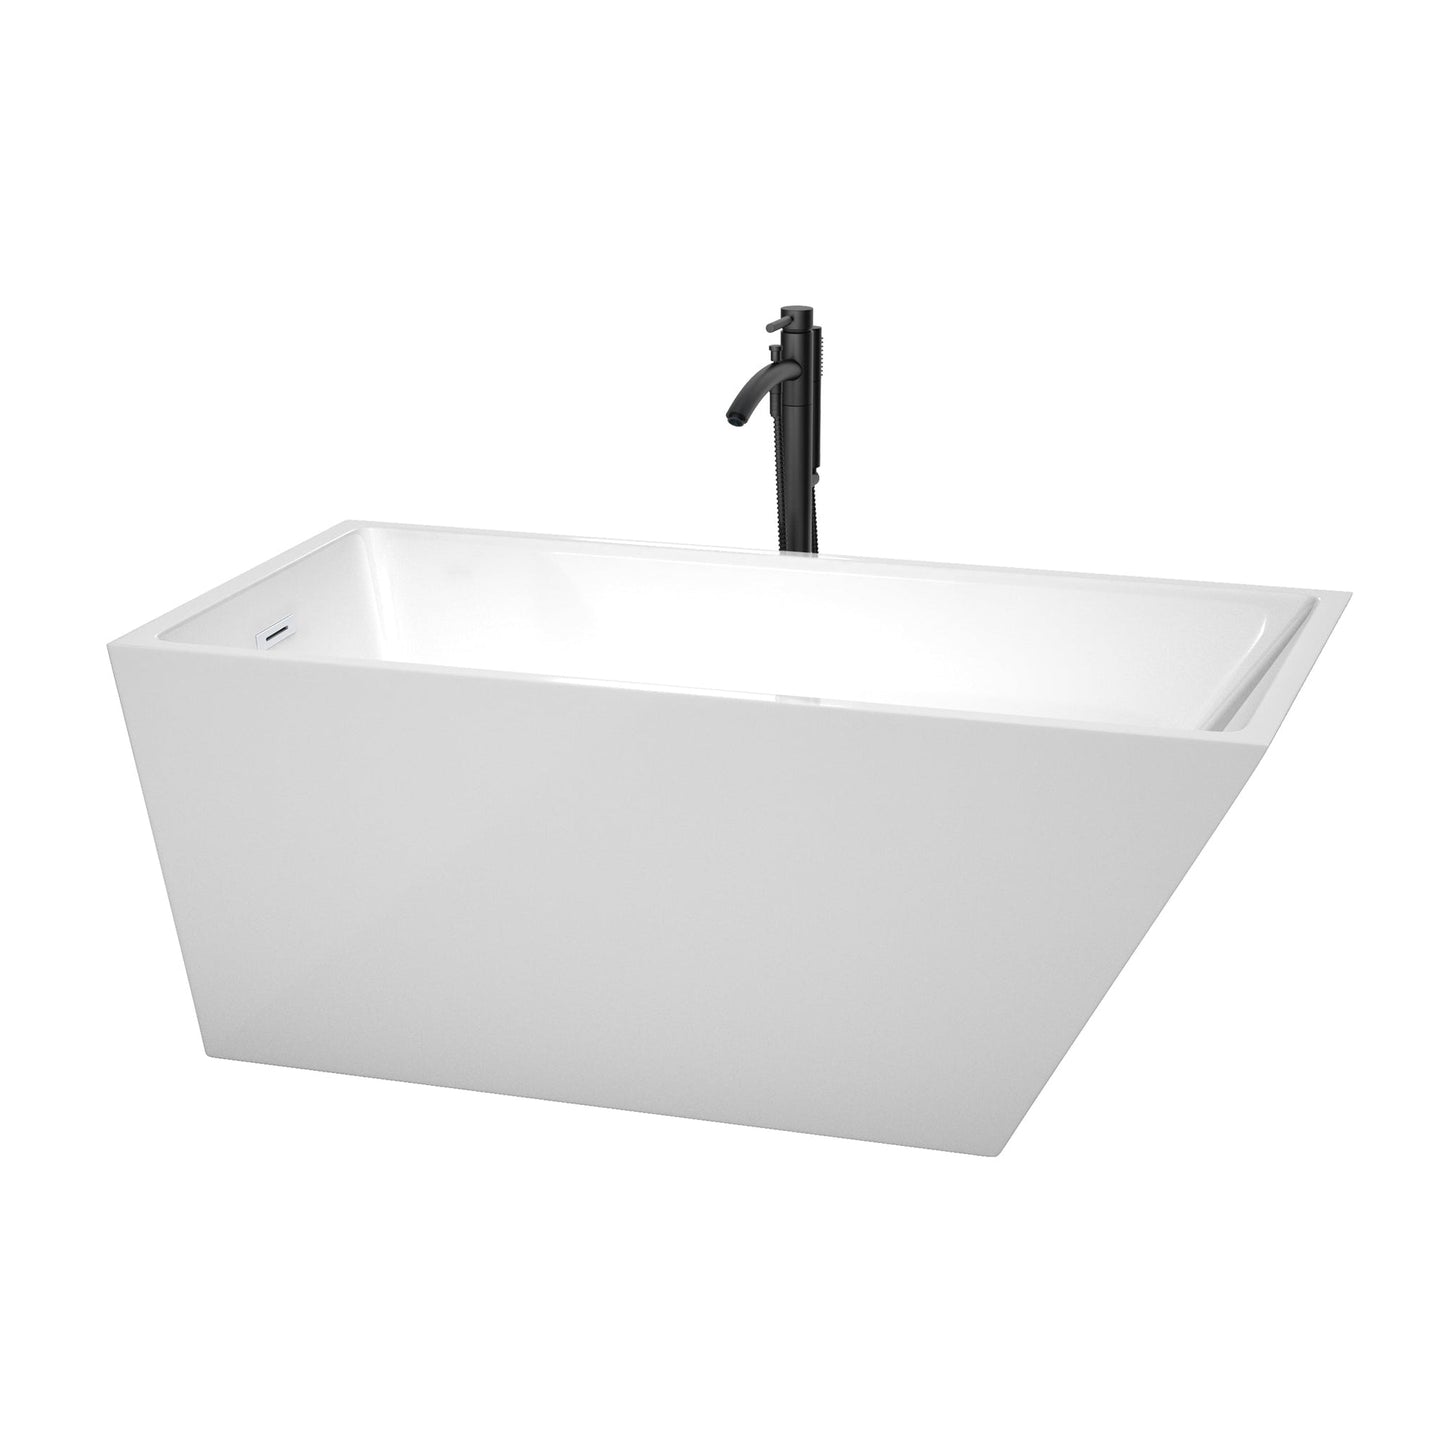 Wyndham Collection Hannah 59" Freestanding Bathtub in White With Shiny White Trim and Floor Mounted Faucet in Matte Black